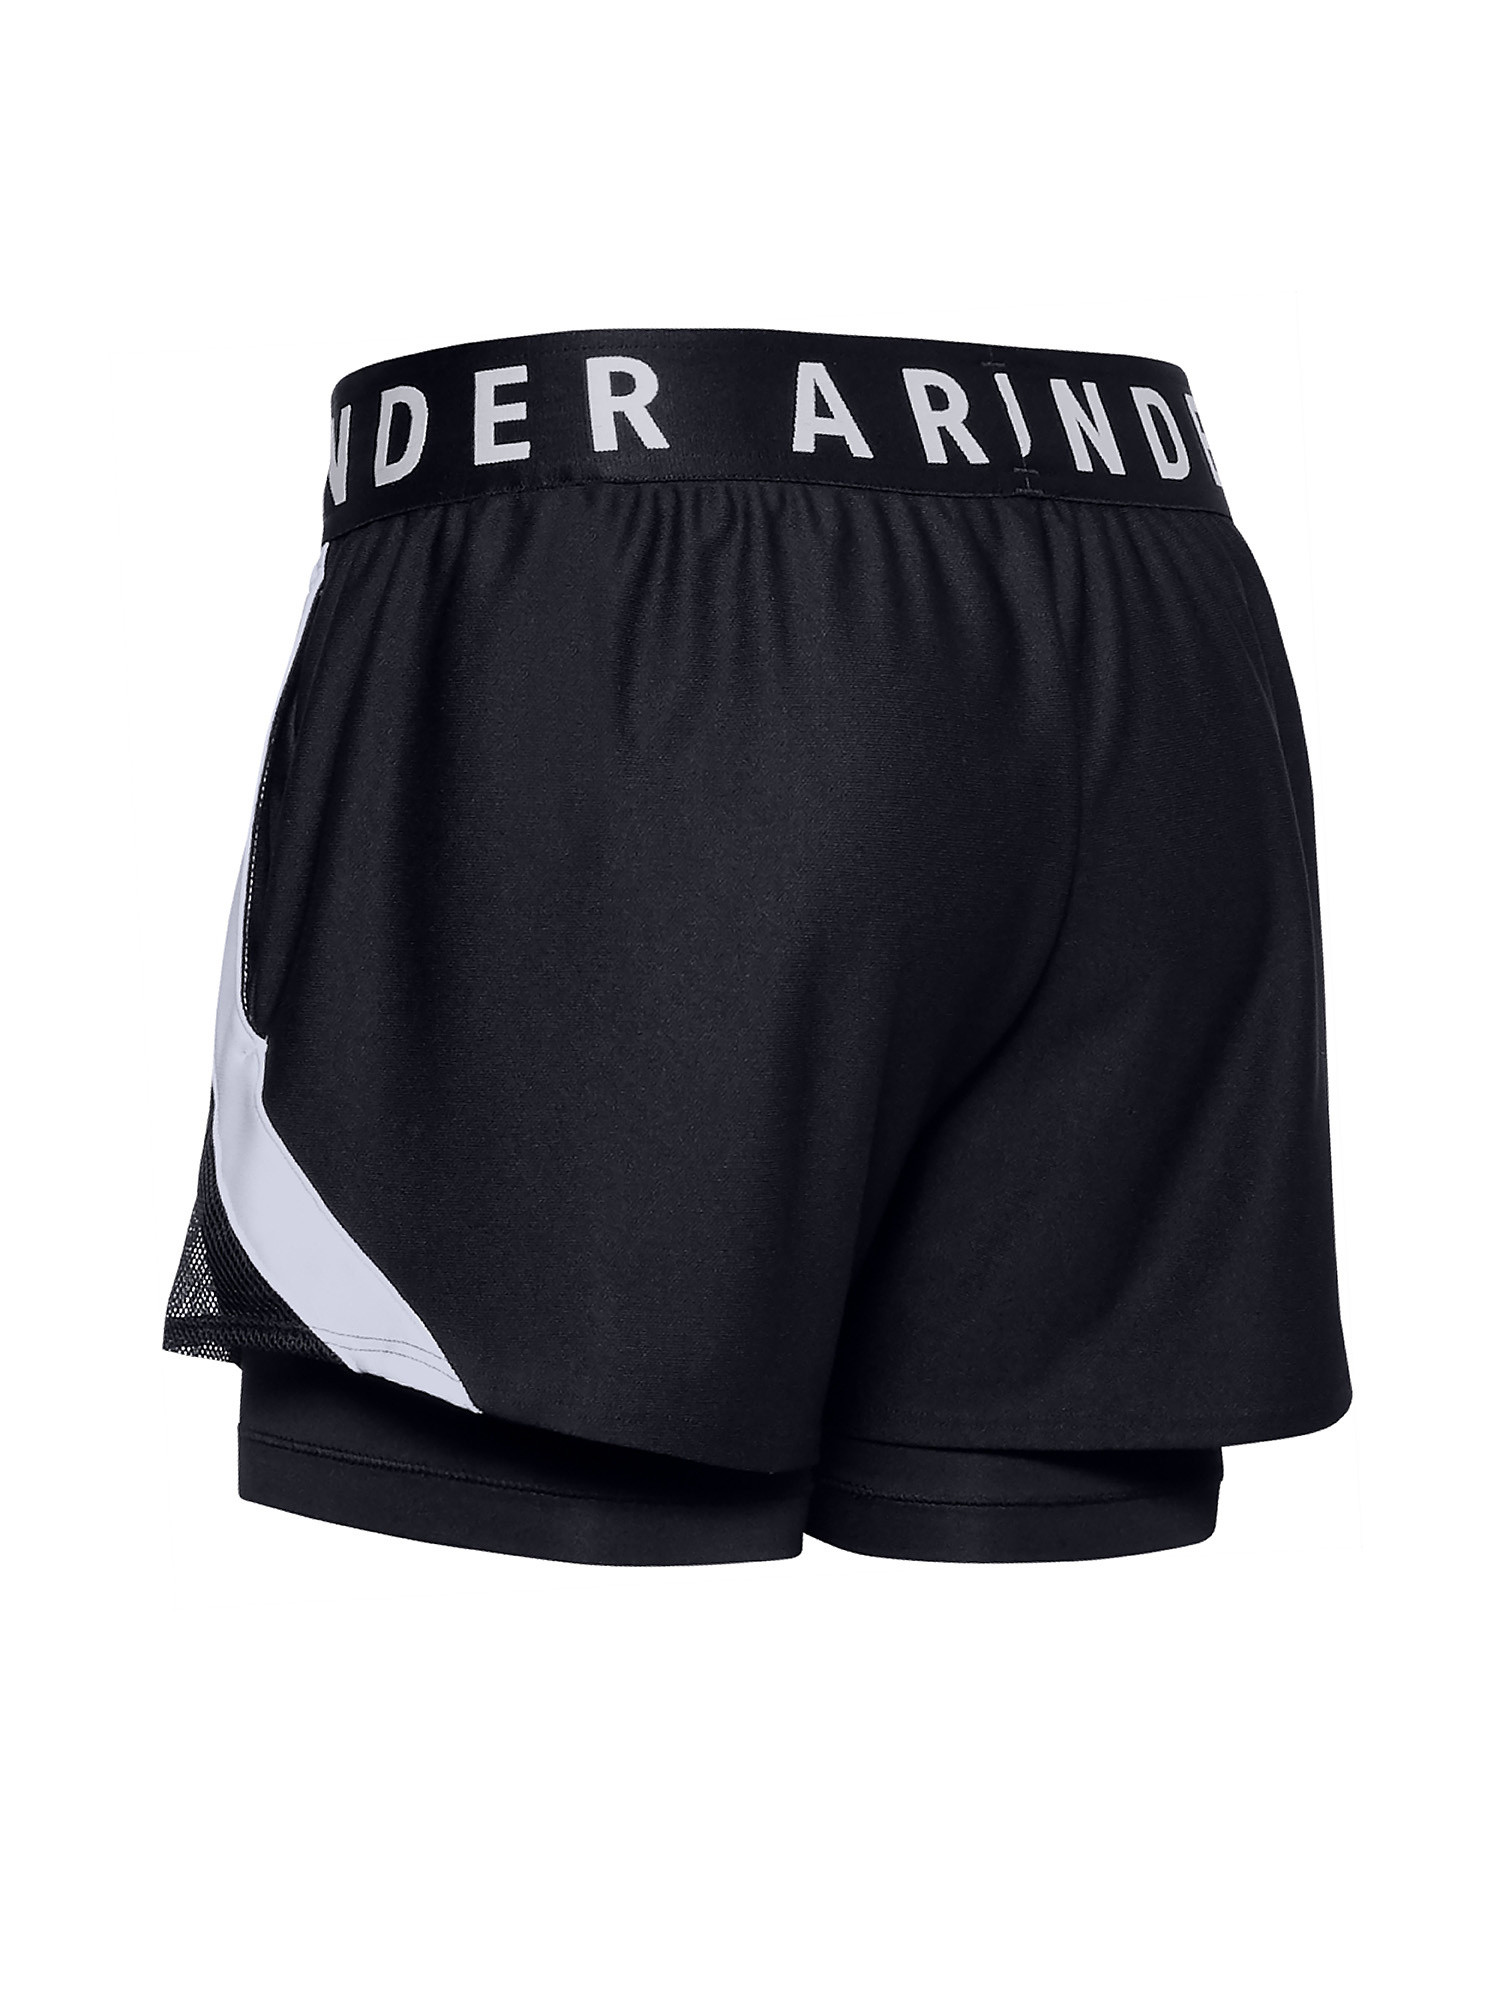 Under Armour - UA Play Up 2 in 1 Shorts, Black, large image number 1